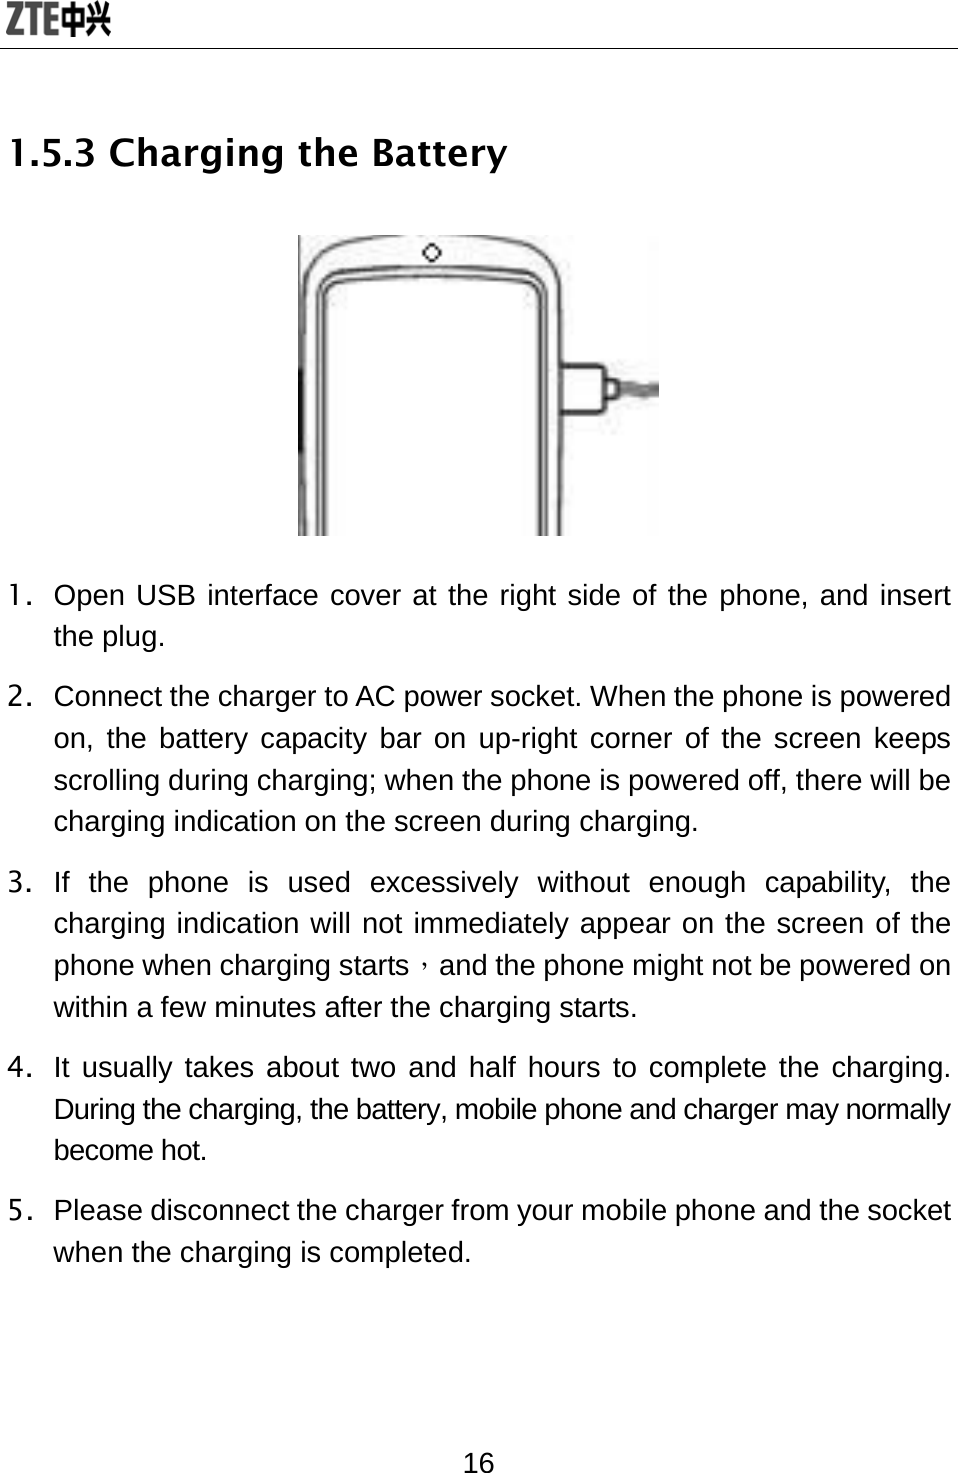  16 1.5.3 Charging the Battery  1.  Open USB interface cover at the right side of the phone, and insert the plug. 2.  Connect the charger to AC power socket. When the phone is powered on, the battery capacity bar on up-right corner of the screen keeps scrolling during charging; when the phone is powered off, there will be charging indication on the screen during charging. 3. If the phone is used excessively without enough capability, the charging indication will not immediately appear on the screen of the phone when charging starts，and the phone might not be powered on within a few minutes after the charging starts. 4.  It usually takes about two and half hours to complete the charging. During the charging, the battery, mobile phone and charger may normally become hot.   5.  Please disconnect the charger from your mobile phone and the socket when the charging is completed. 